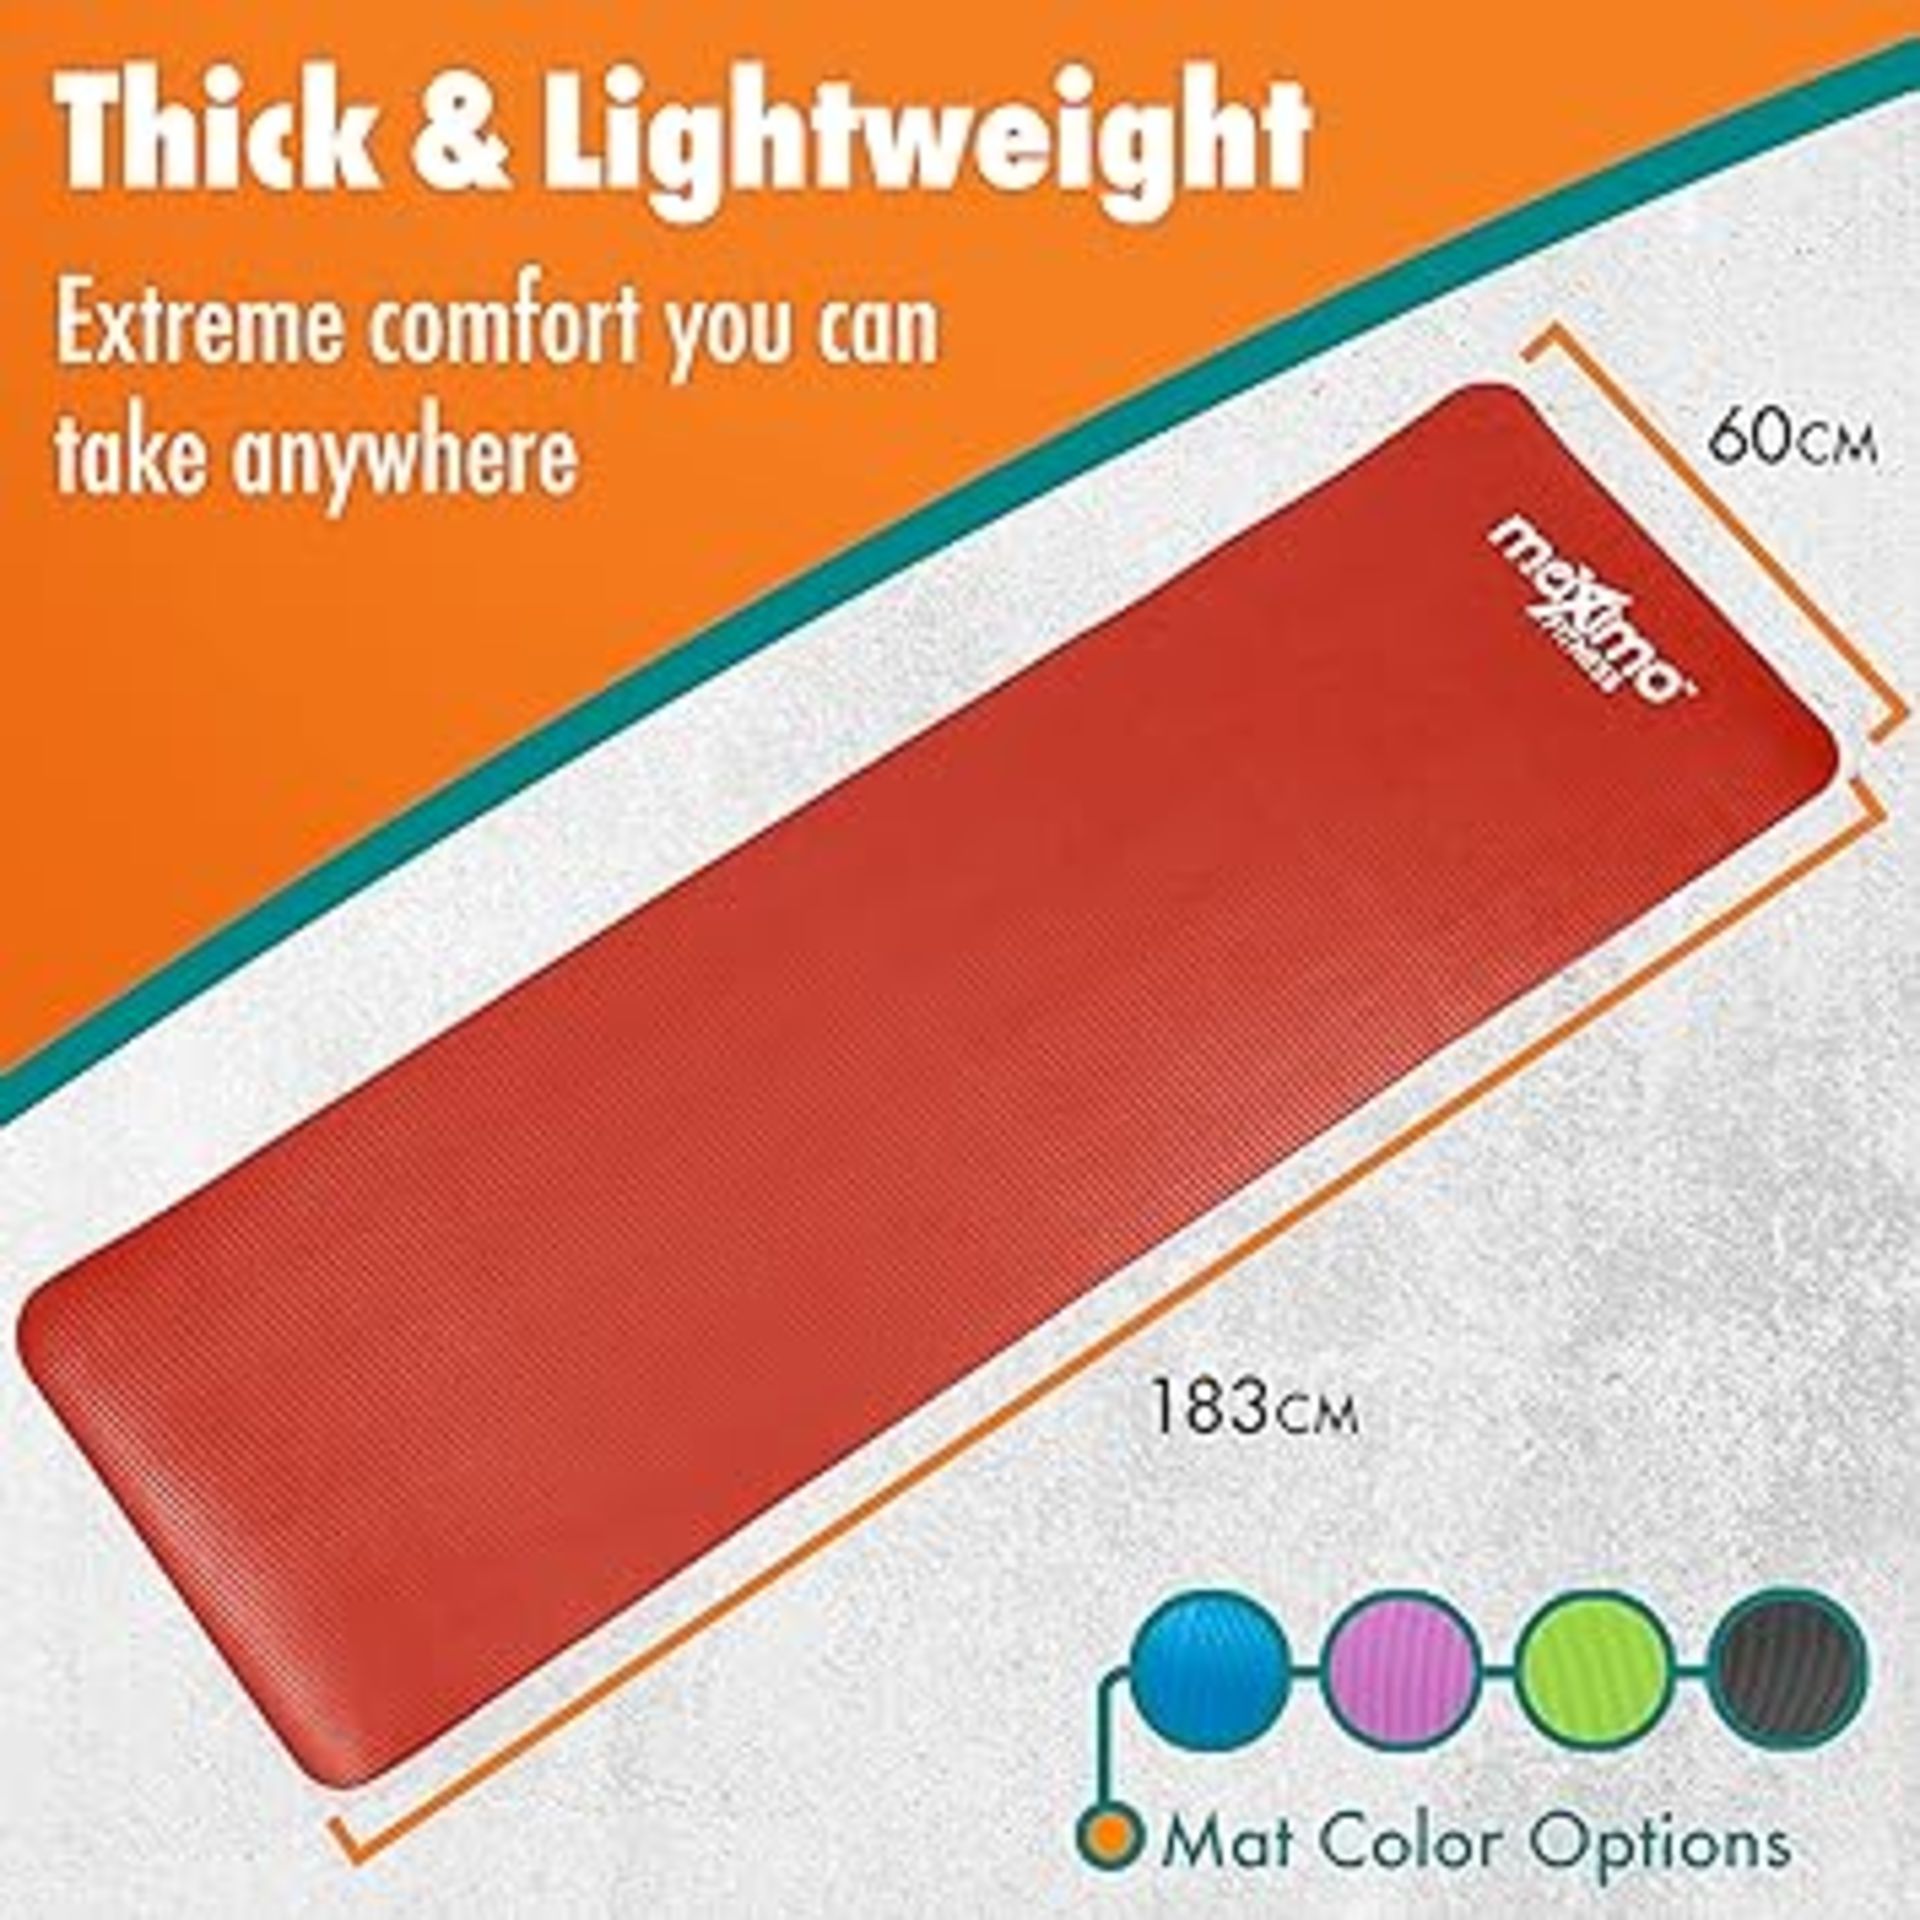 Pallet of Exercise Mats (Red) - Image 2 of 4